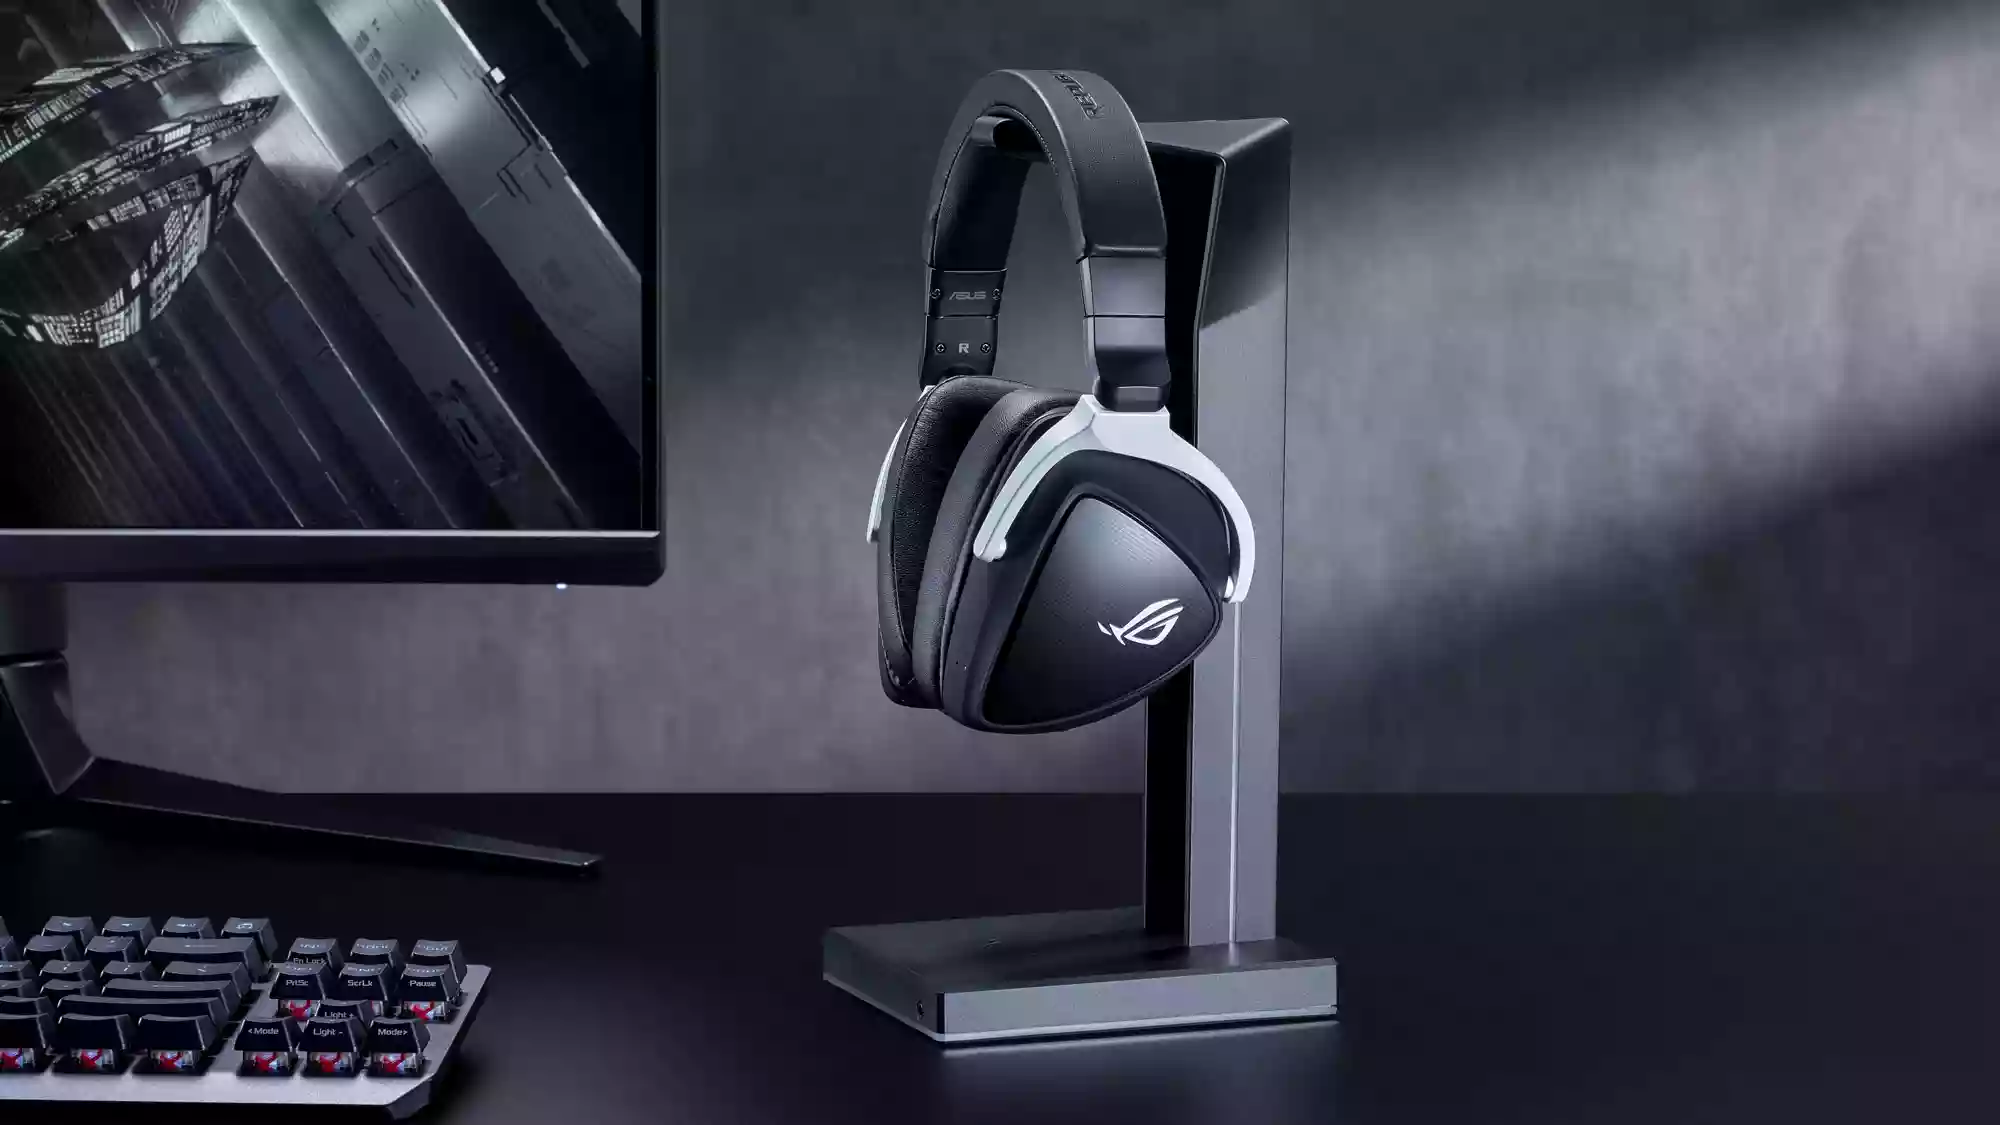 A photo of the ROG Delta S Wireless headset hanging on a headphone hook next to a gaming PC.